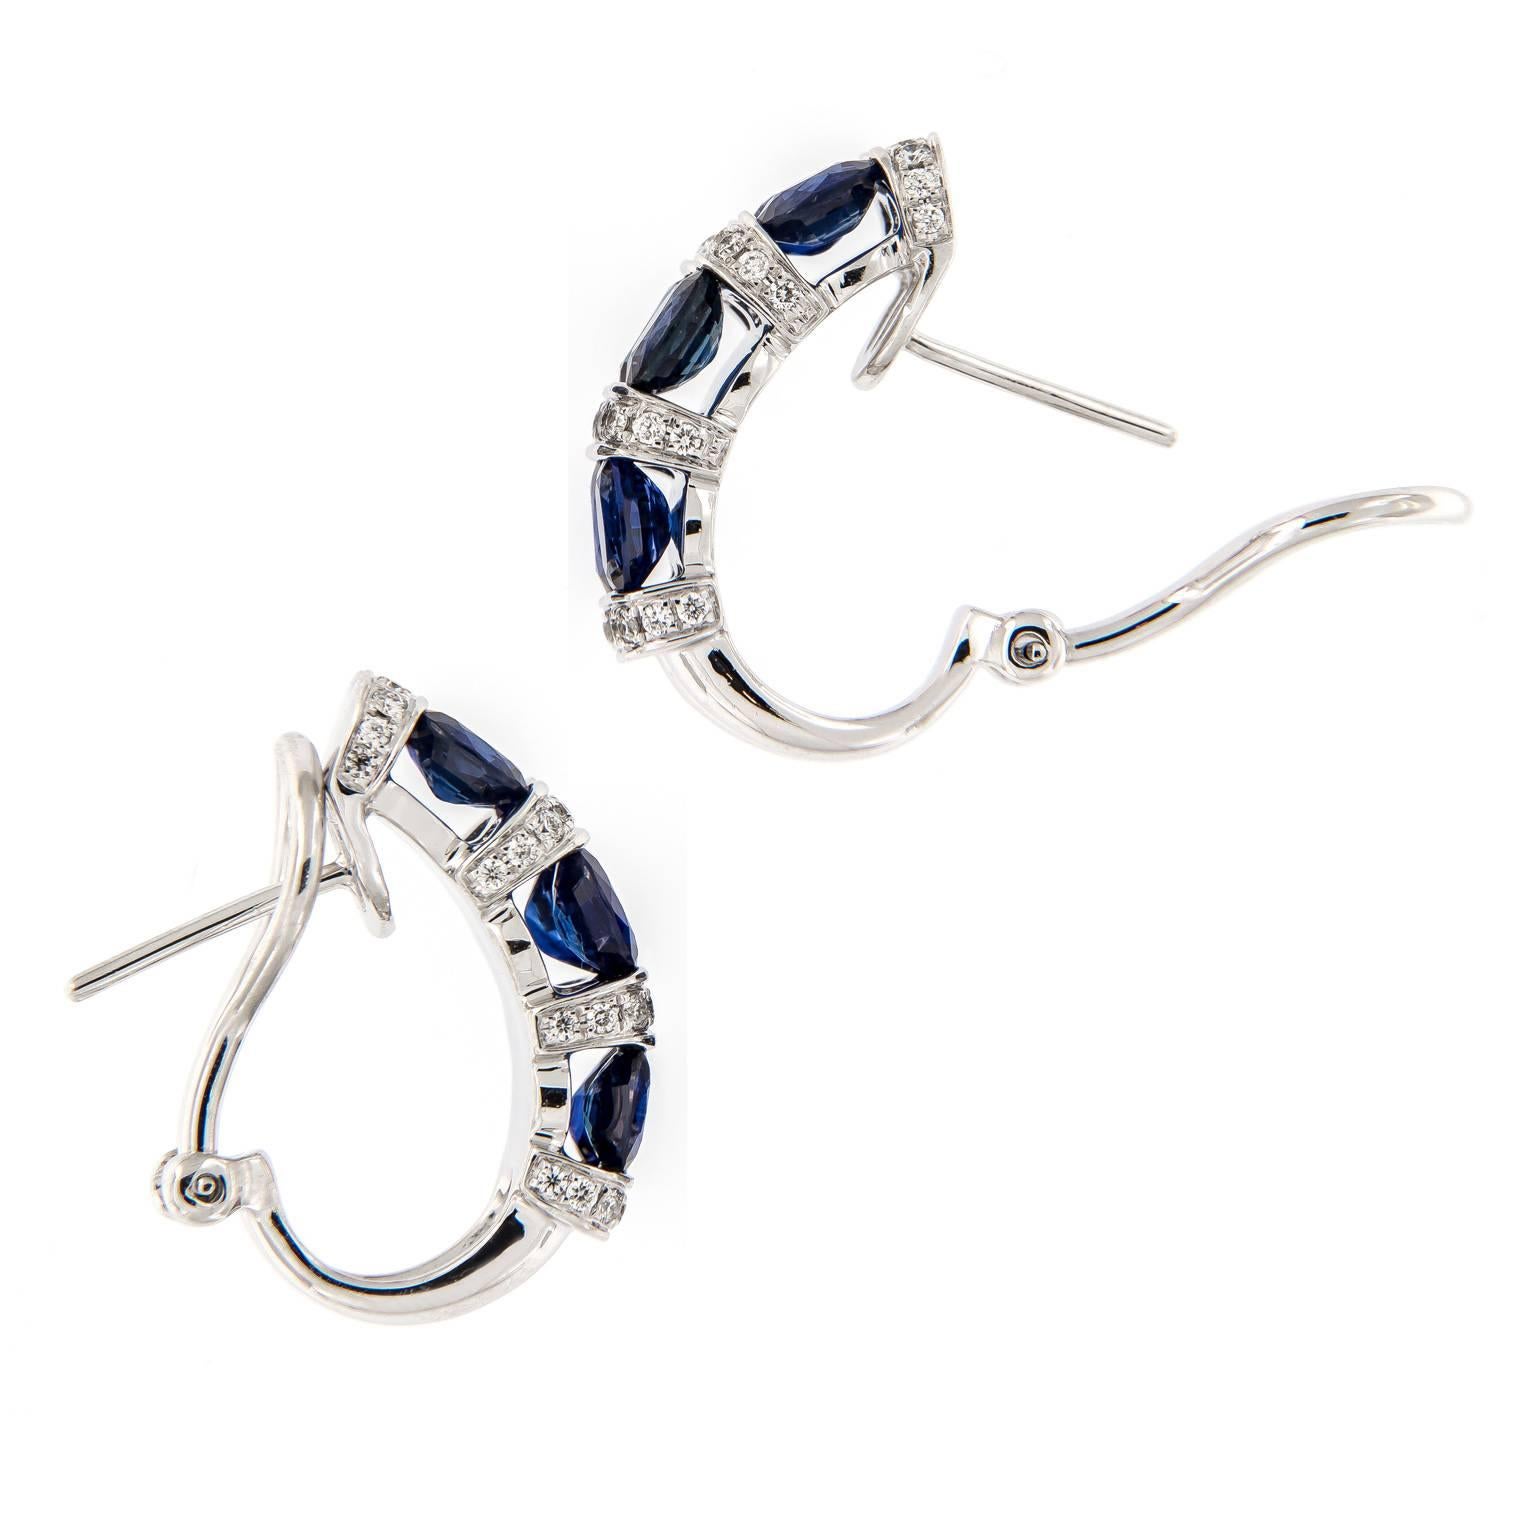 Elegantly stunning alternate rows of juicy saturated blue oval sapphires and pave set fine white diamonds create a beautiful look. Earrings are crafted in fine 18k white gold and have posts with omega clip backs for security of wear. Complimentary